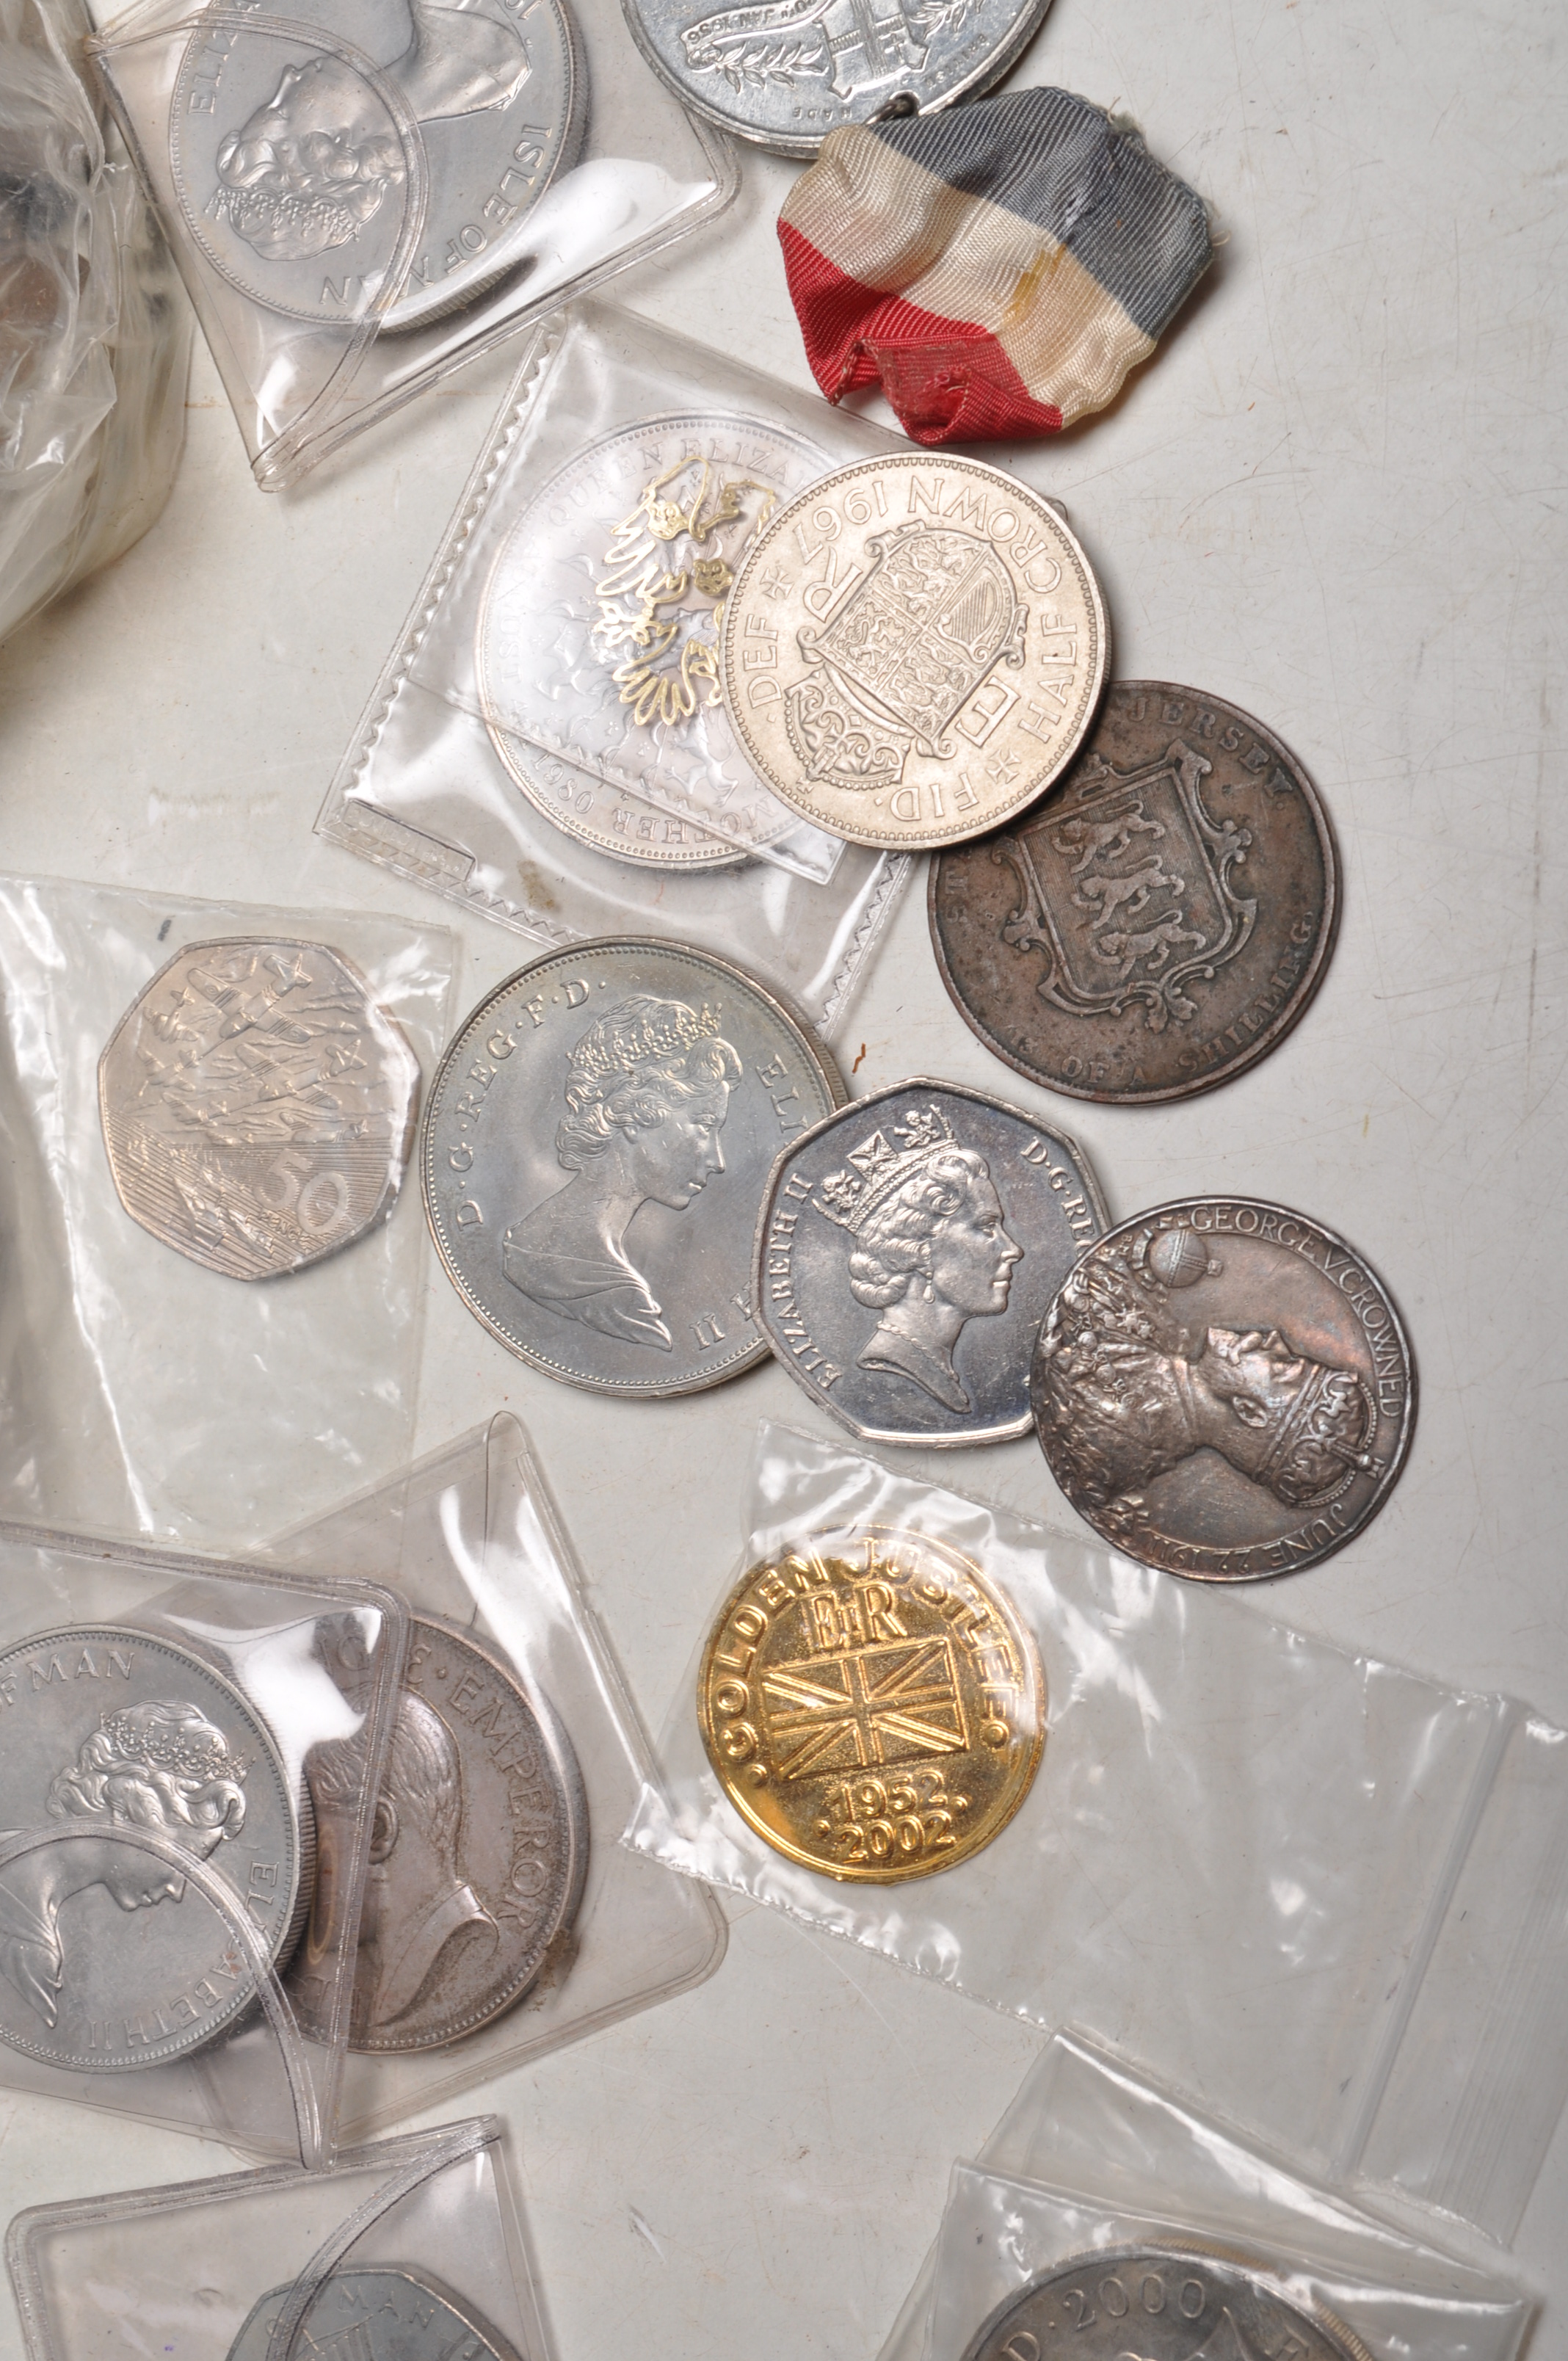 LARGE COLLECTION OF 20TH CENTURY UK CURRENCY AND COMMORATIVE COINS - Image 4 of 14